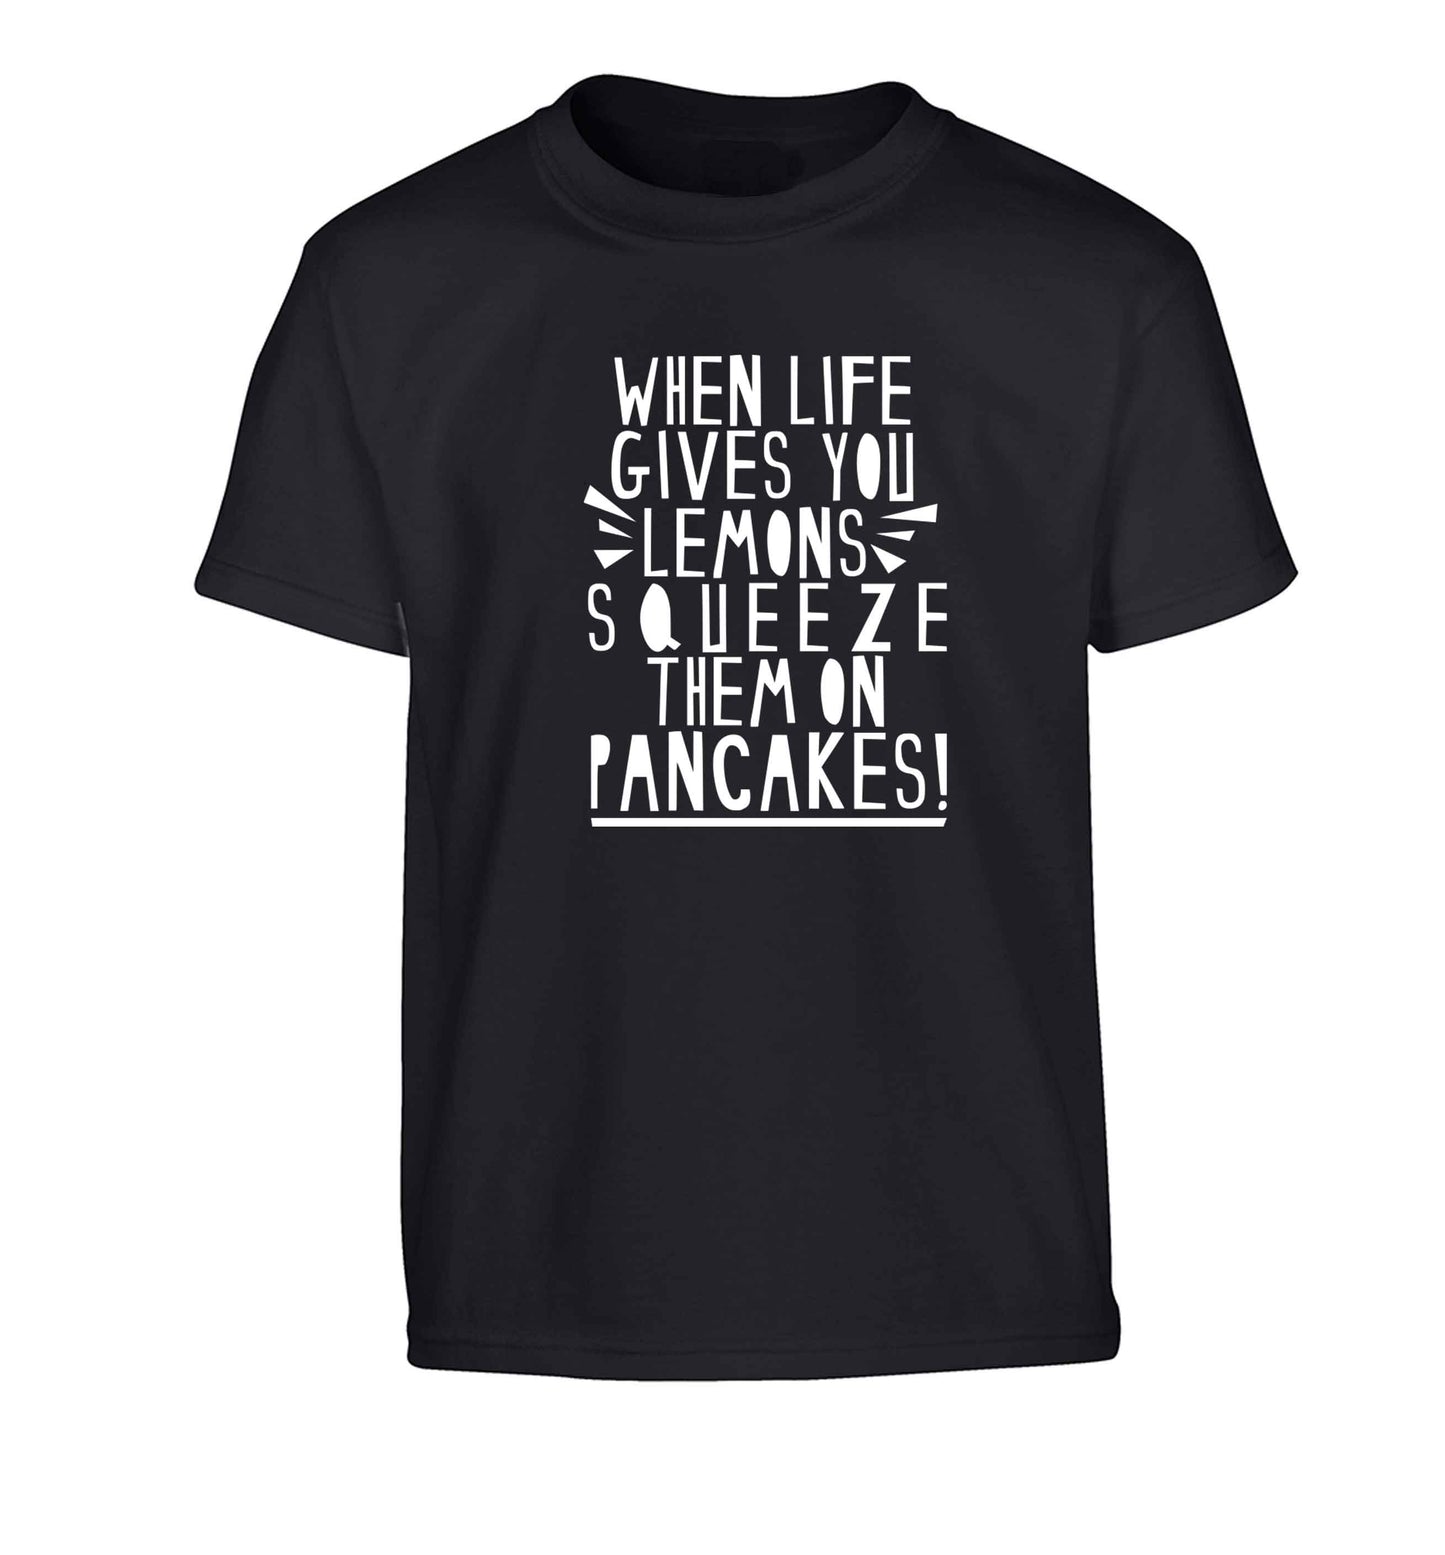 When life gives you lemons squeeze them on pancakes! Children's black Tshirt 12-13 Years